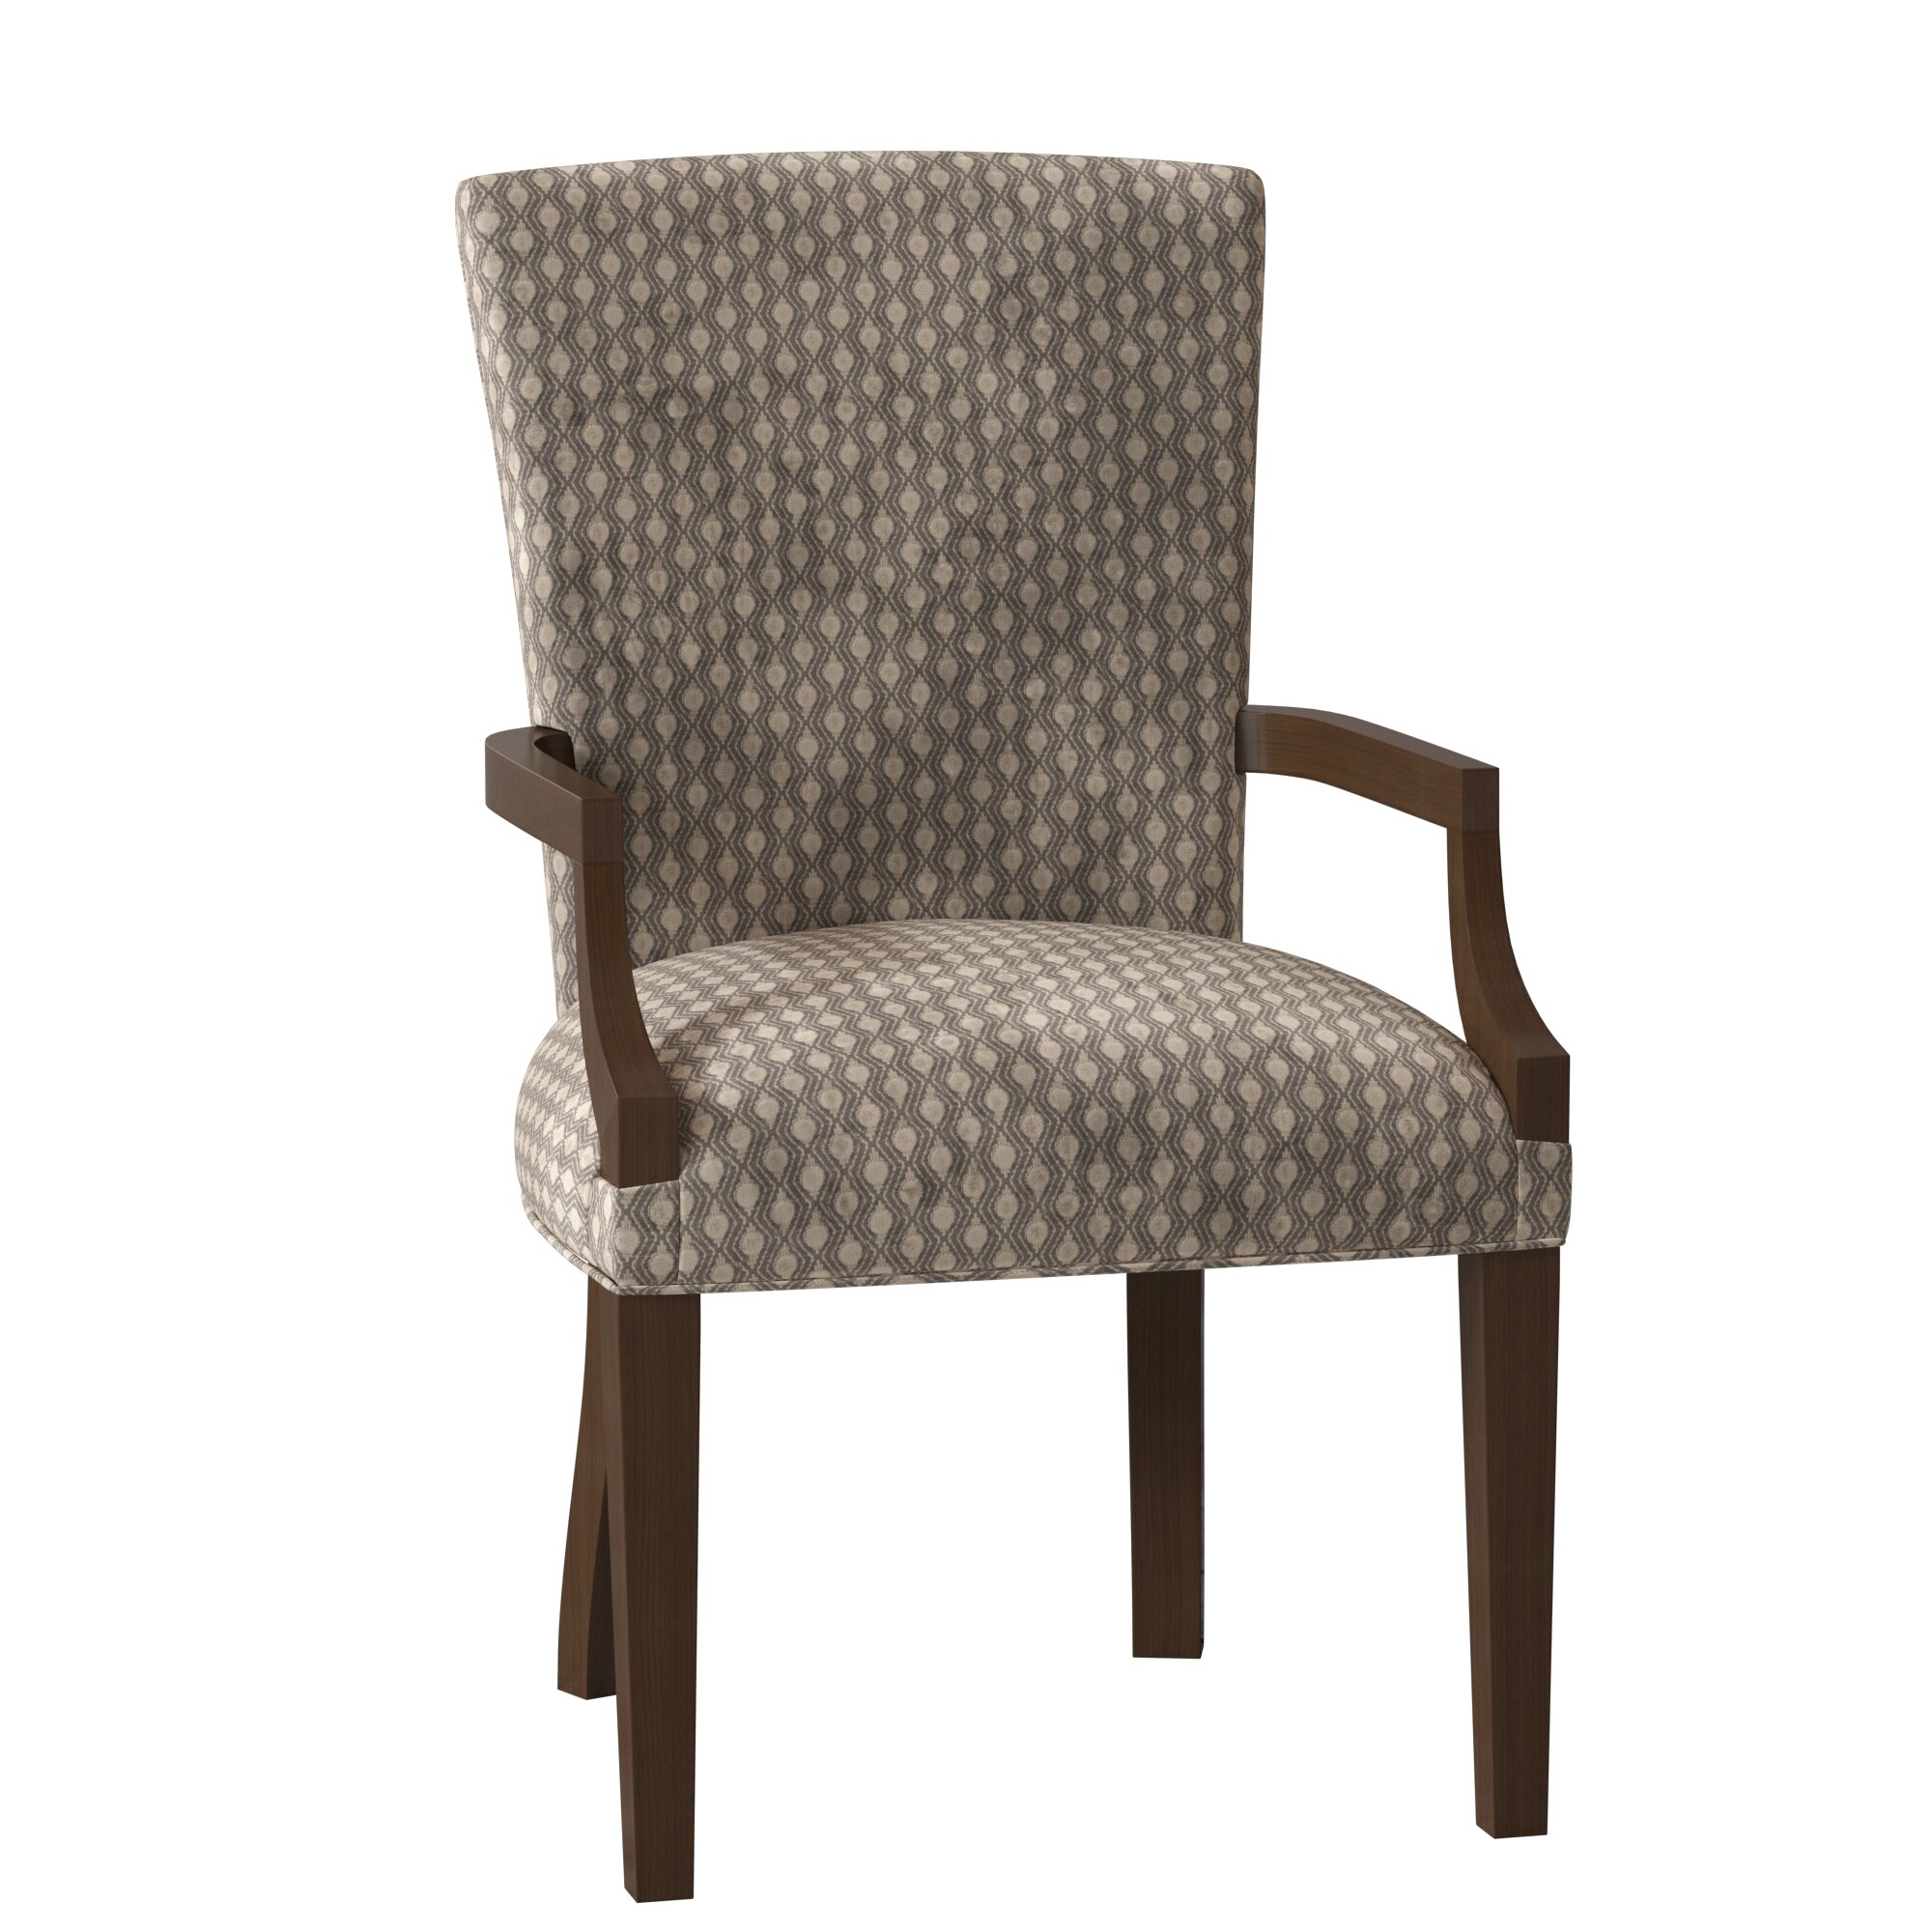 Duralee Furniture Chicago Upholstered Solid Back Arm Chair In